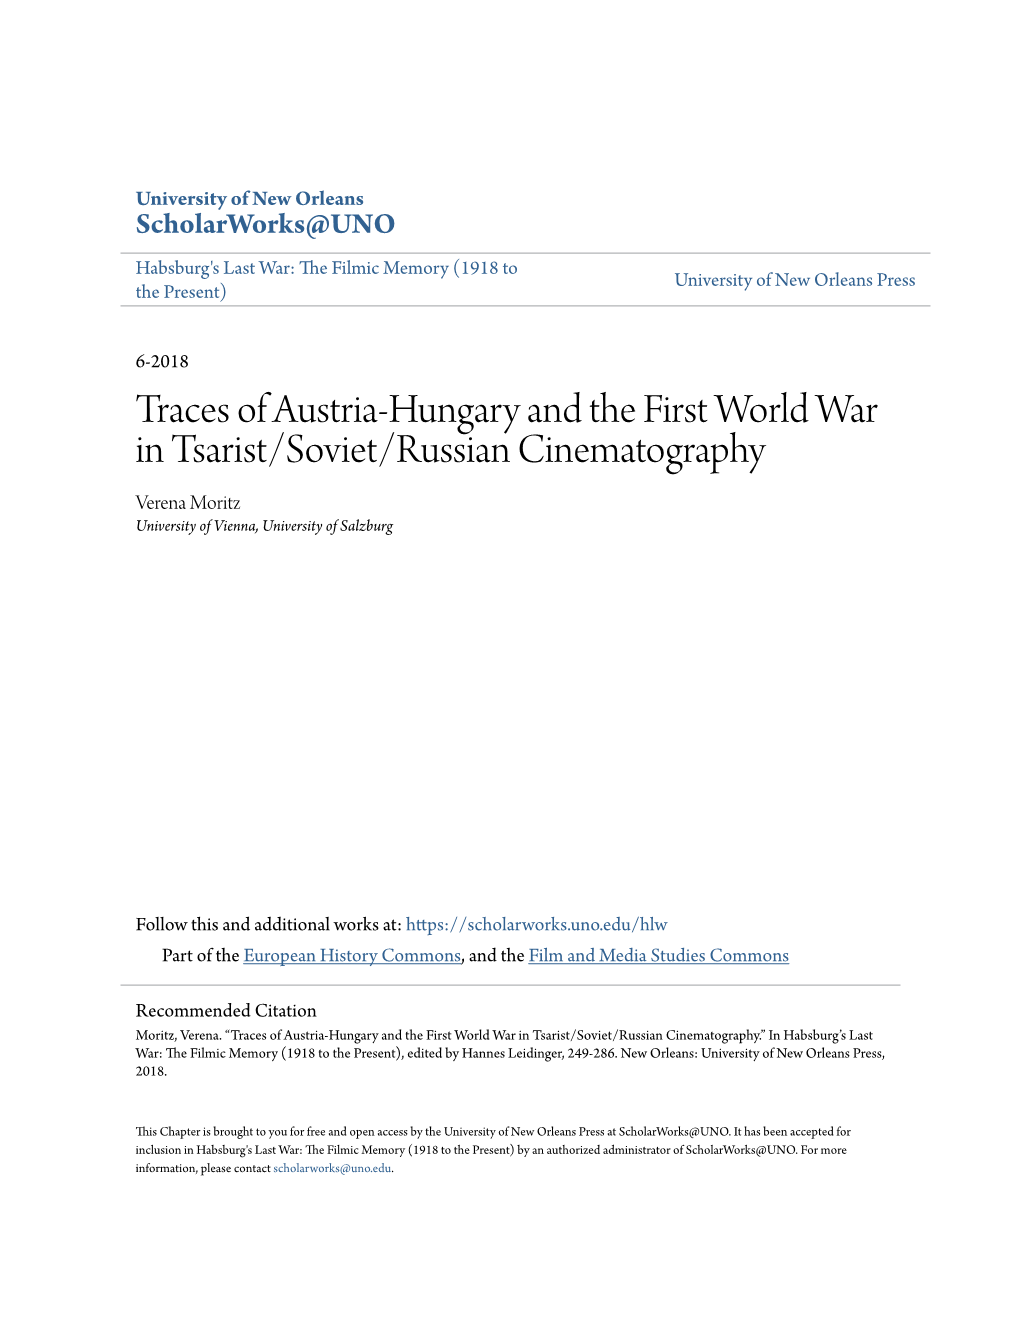 Traces of Austria-Hungary and the First World War in Tsarist/Soviet/Russian Cinematography Verena Moritz University of Vienna, University of Salzburg